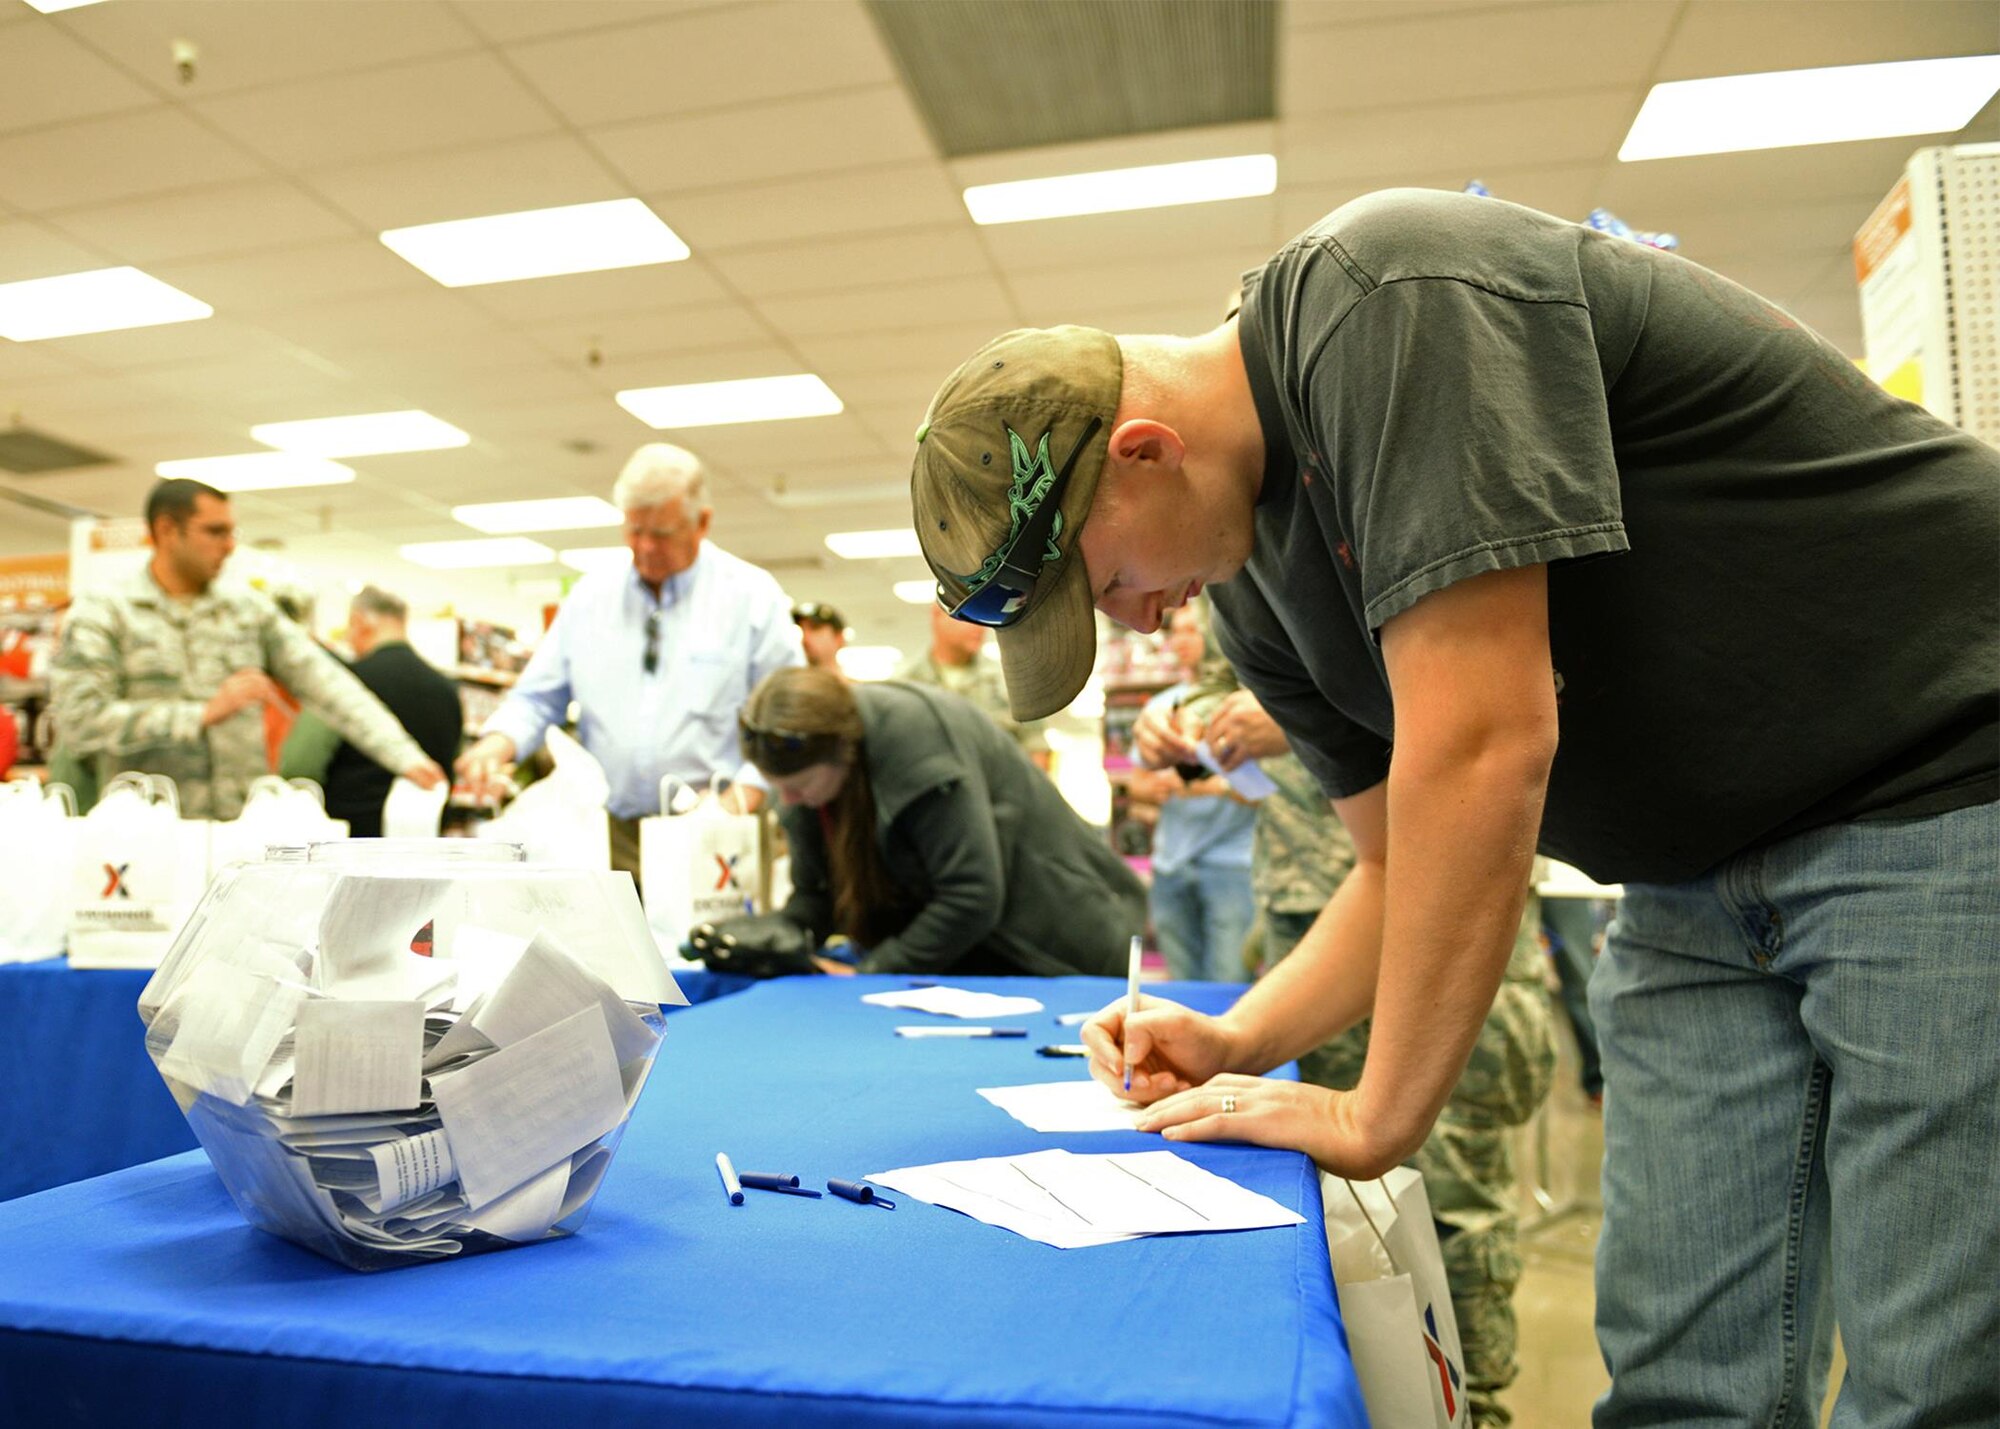 Senior Airman Austin Kauffman enters a raffle during the grand re-opening of the newly renovated Base Exchange Feb. 25, 2016, Beale Air Force Base, California. The remodeling project cost approximate$1.9 million, which includes new flooring, a floor plan to accommodate an expanded product line, new displays, and a new central checkout location. (U.S. Air Force photo by Robert Scott)